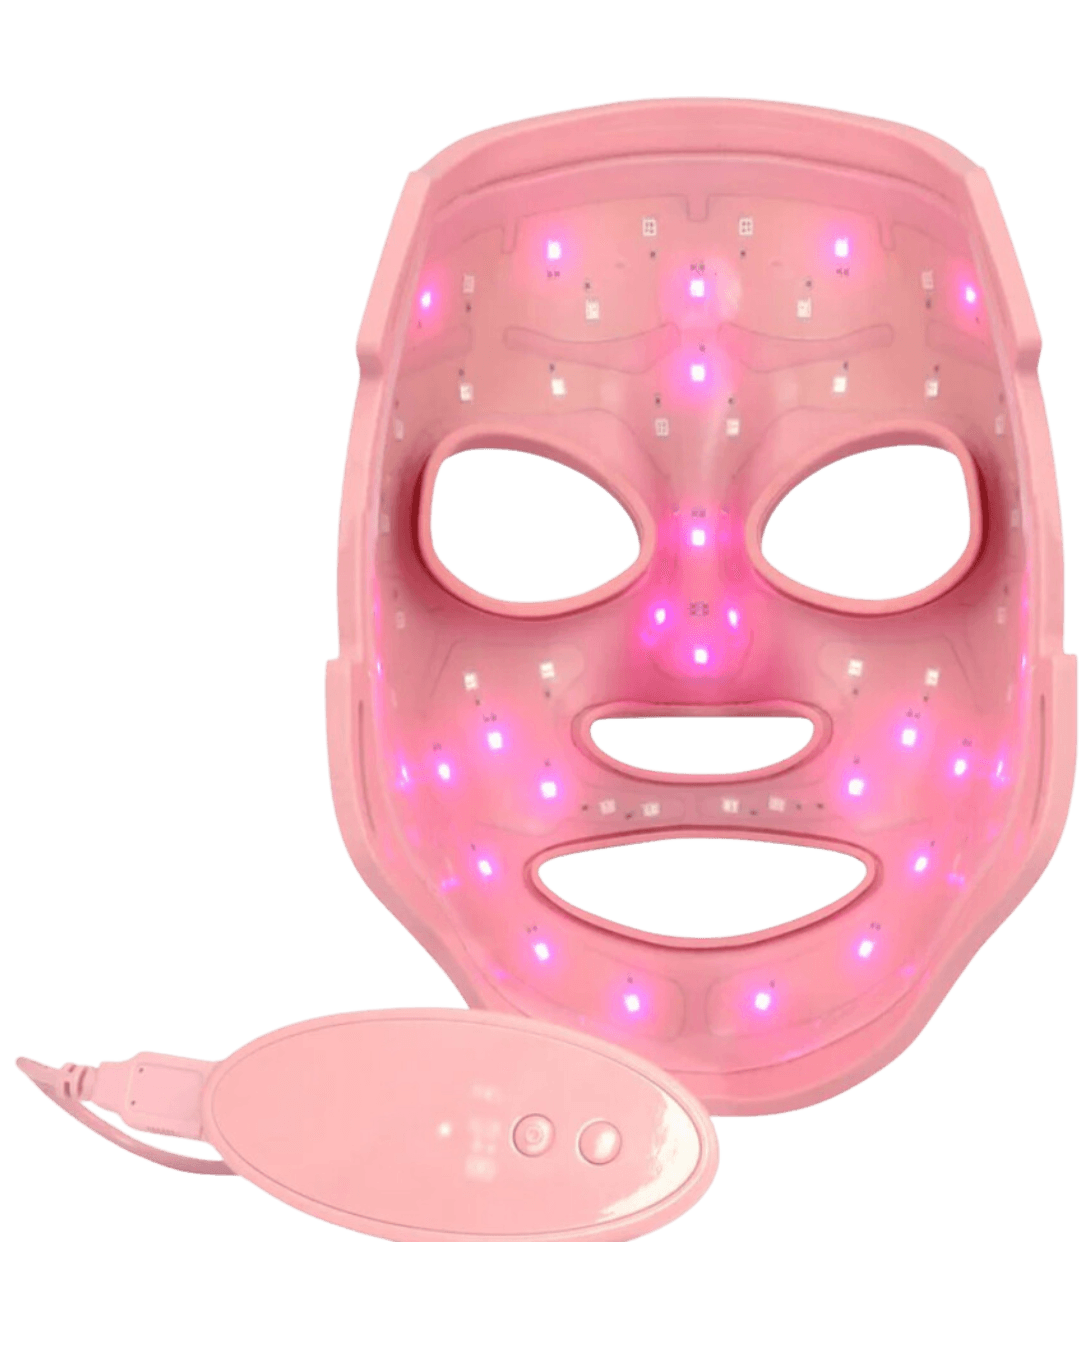 Daily Vanity Beauty Awards 2024 Best Skincare MZ Skin Lightmax Supercharged Led Face Mask Voted By Beauty Experts